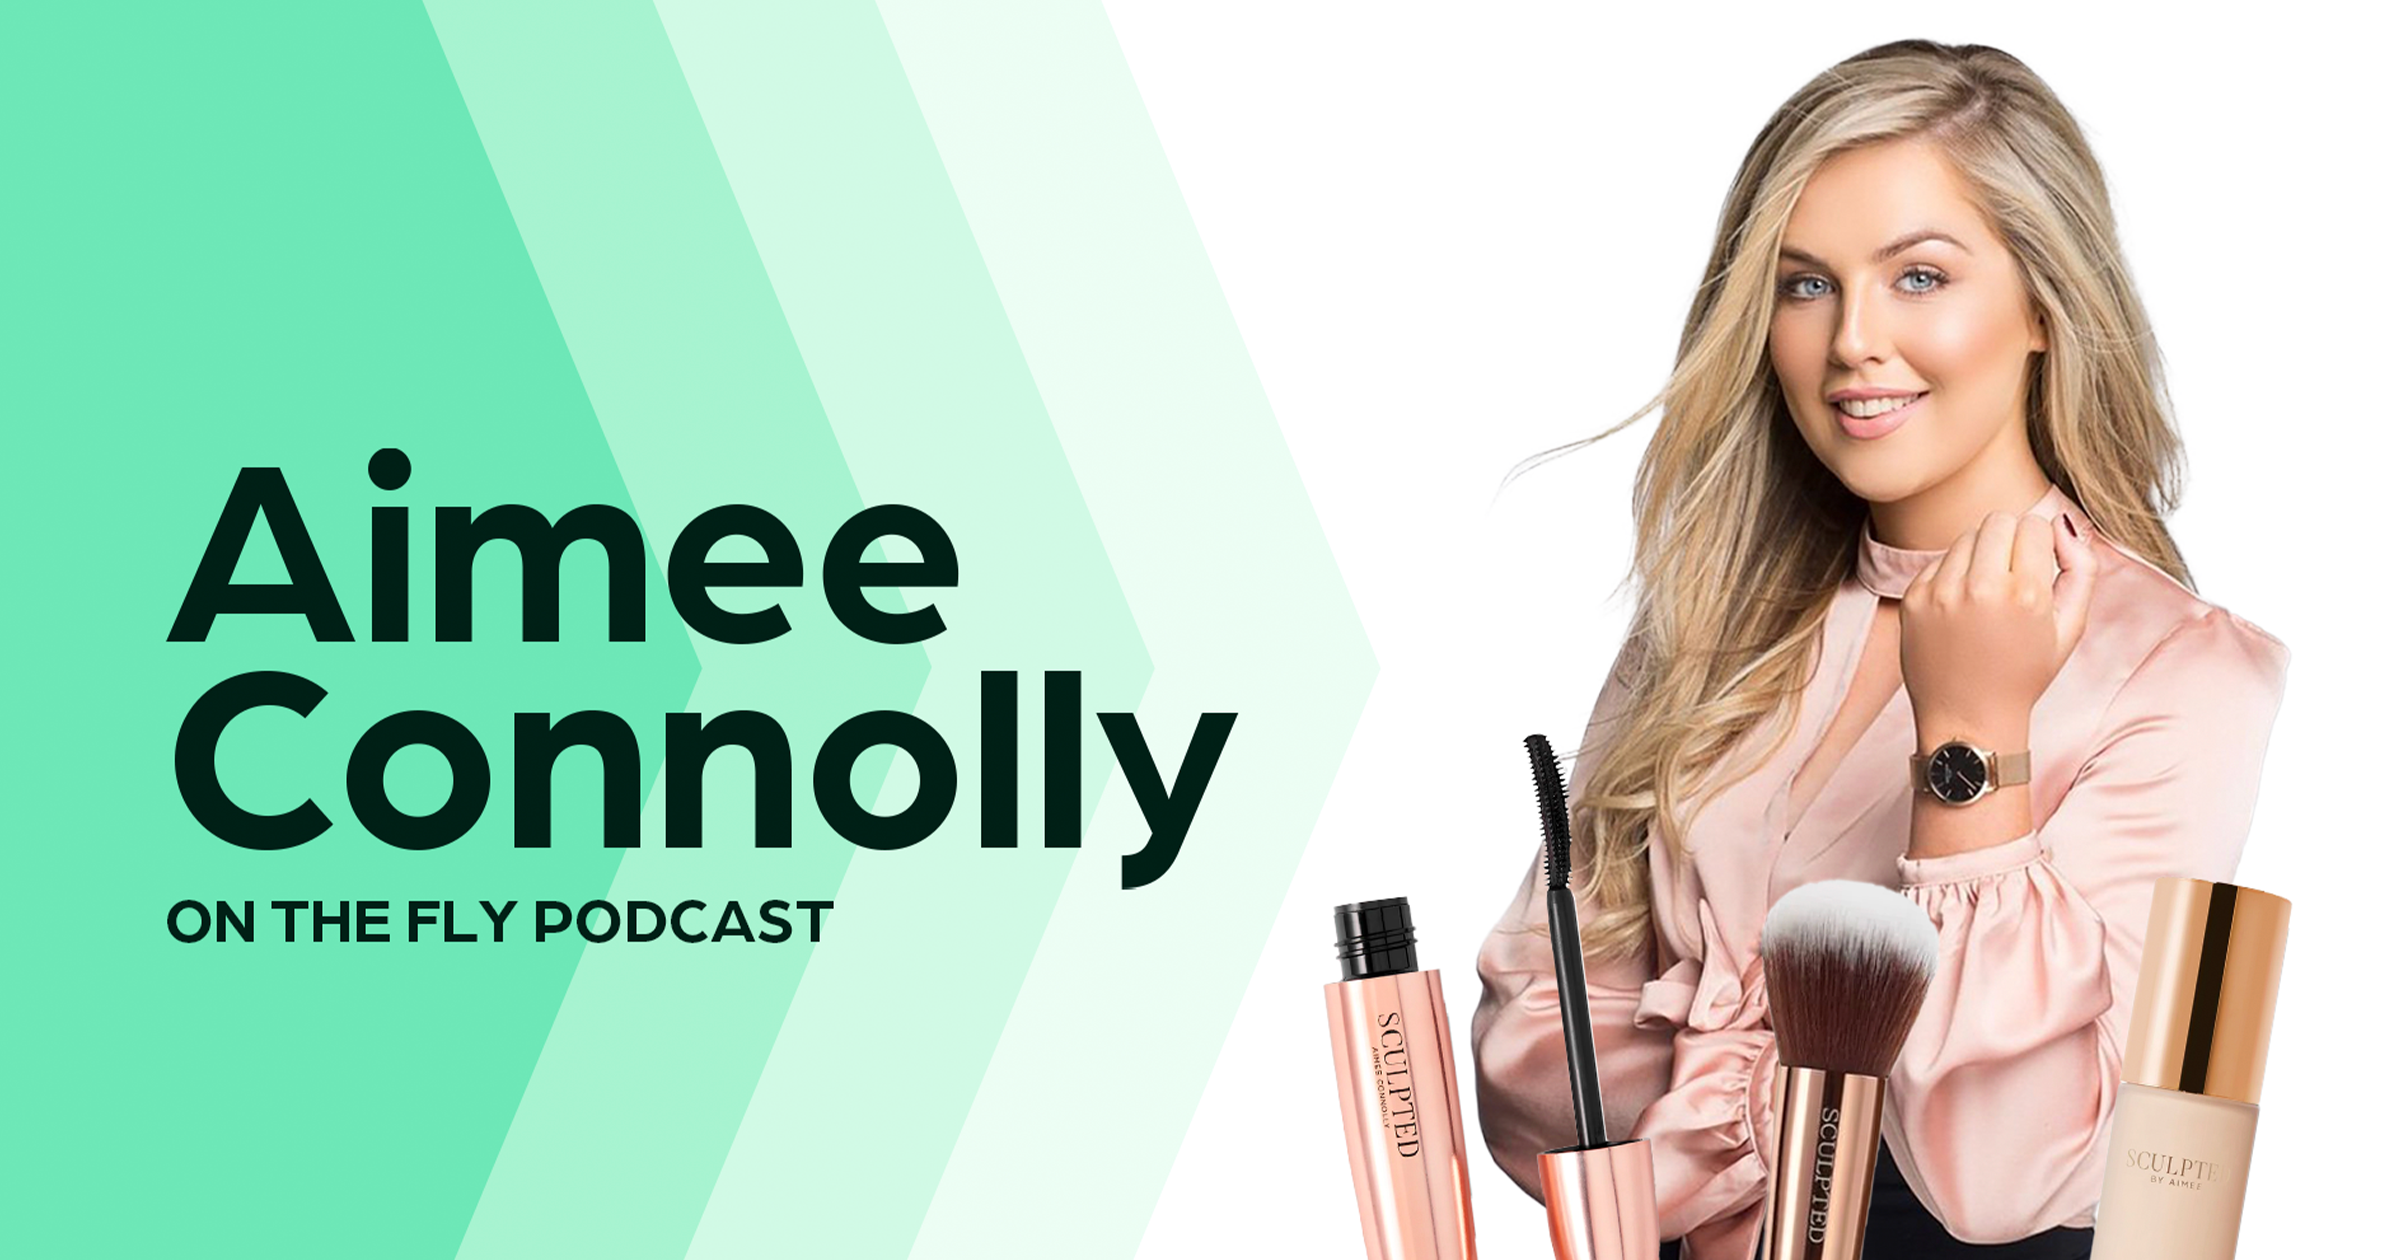 On the fly podcast met Aimee Connolly